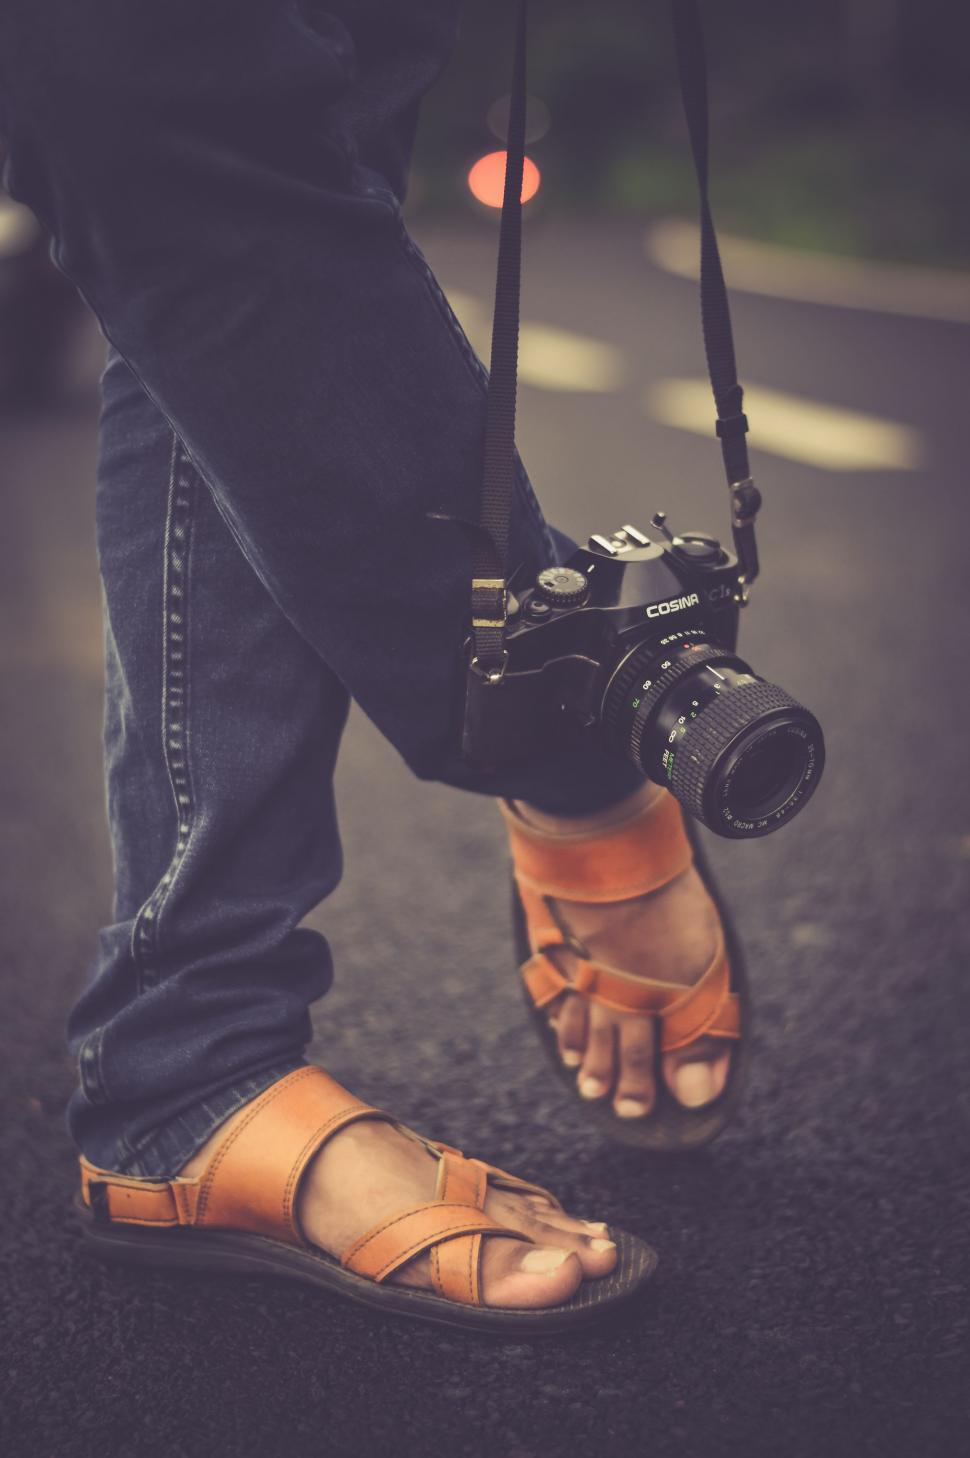 Free Image of Camera and Feet  